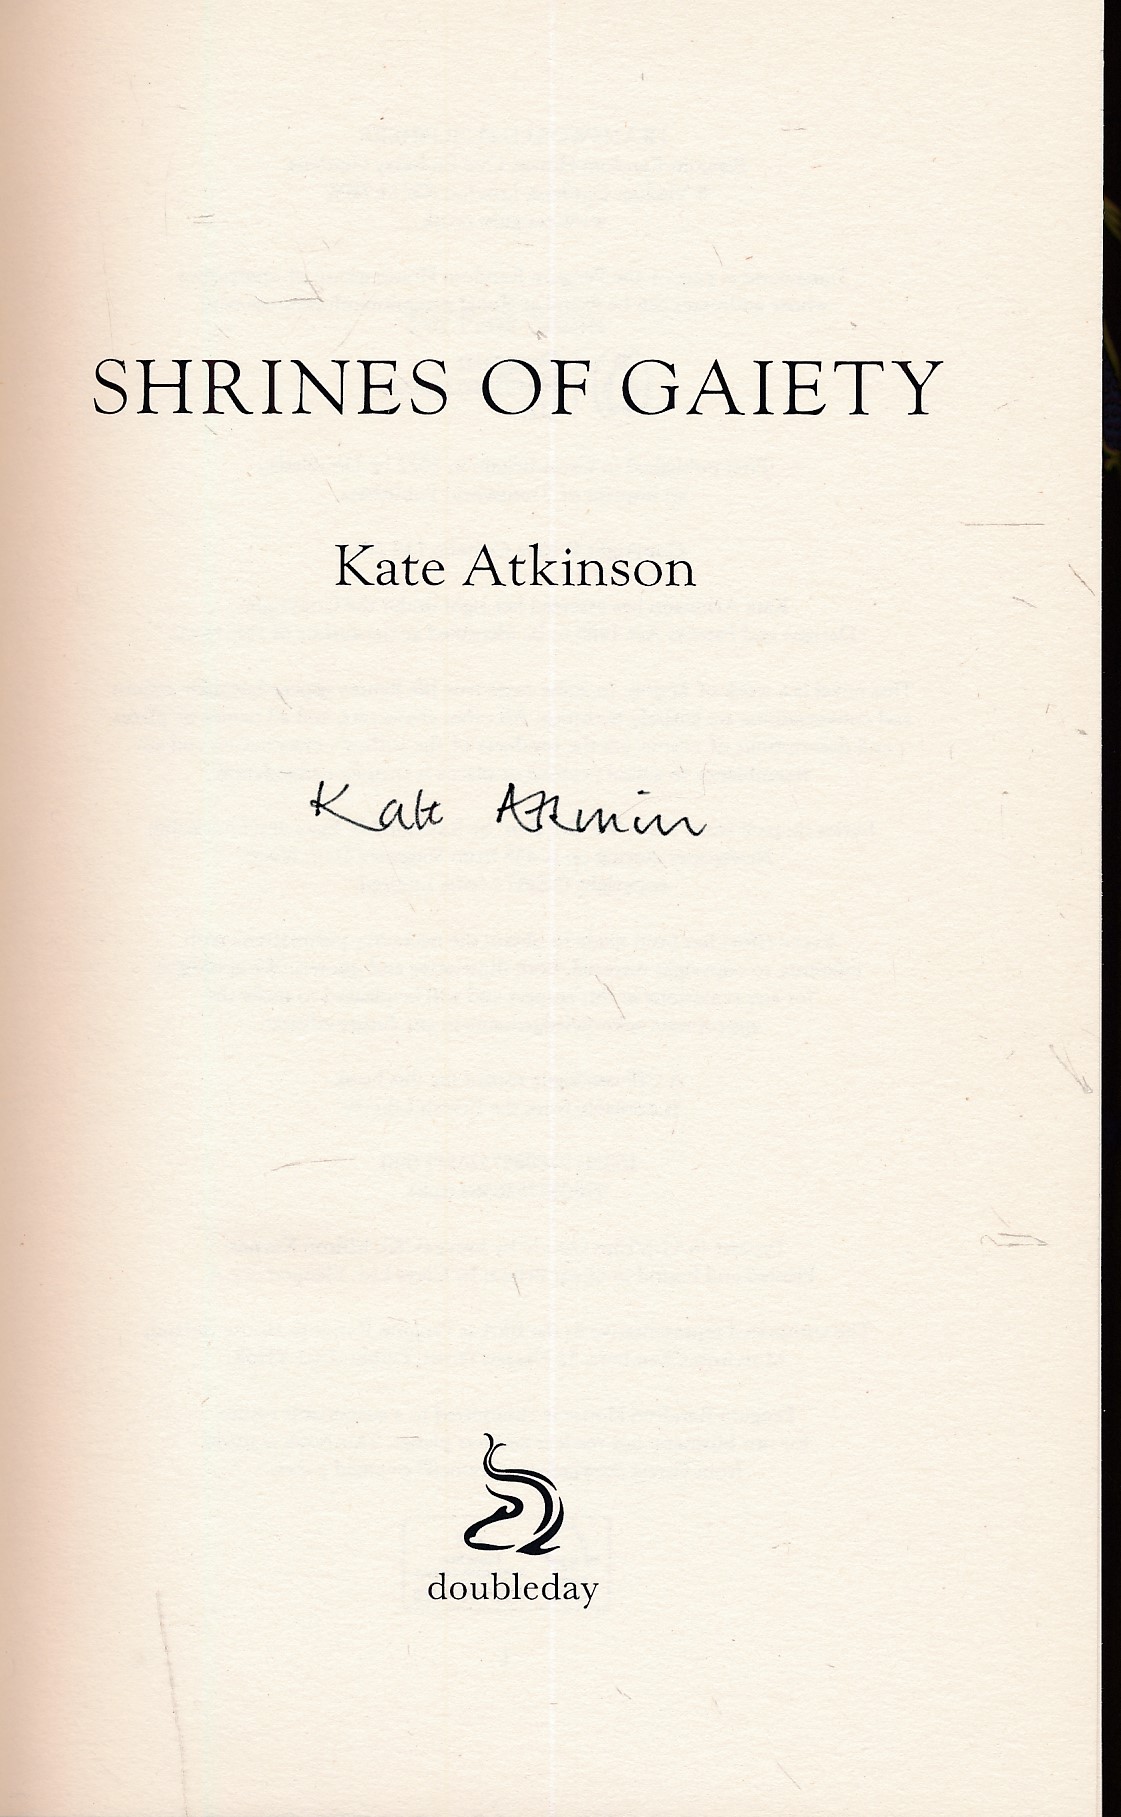 Shrines of Gaiety. Signed copy.